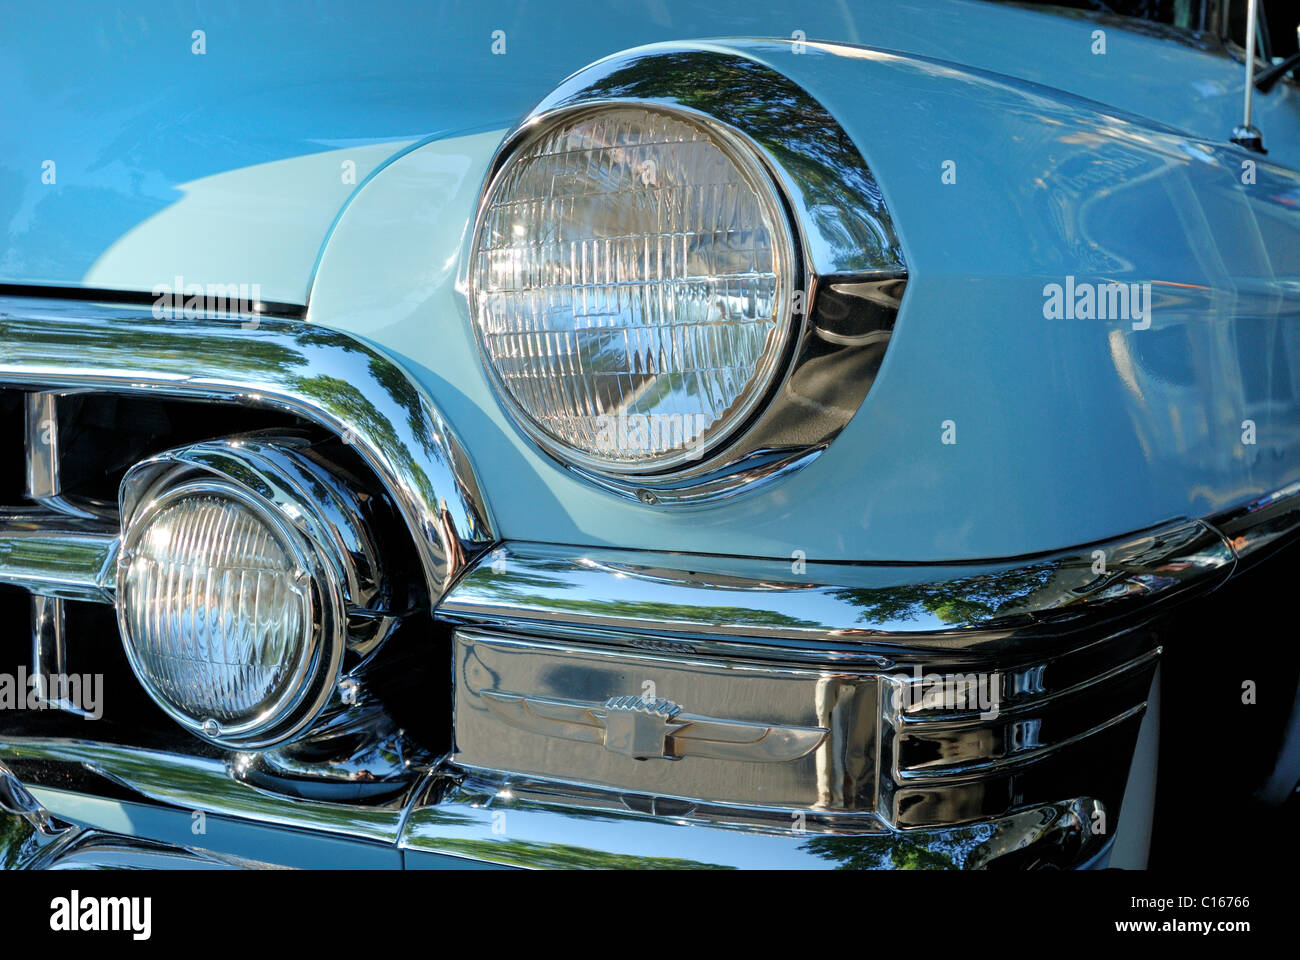 Close-up of the headlights of a 1952 classic blue Cadillac. Stock Photo